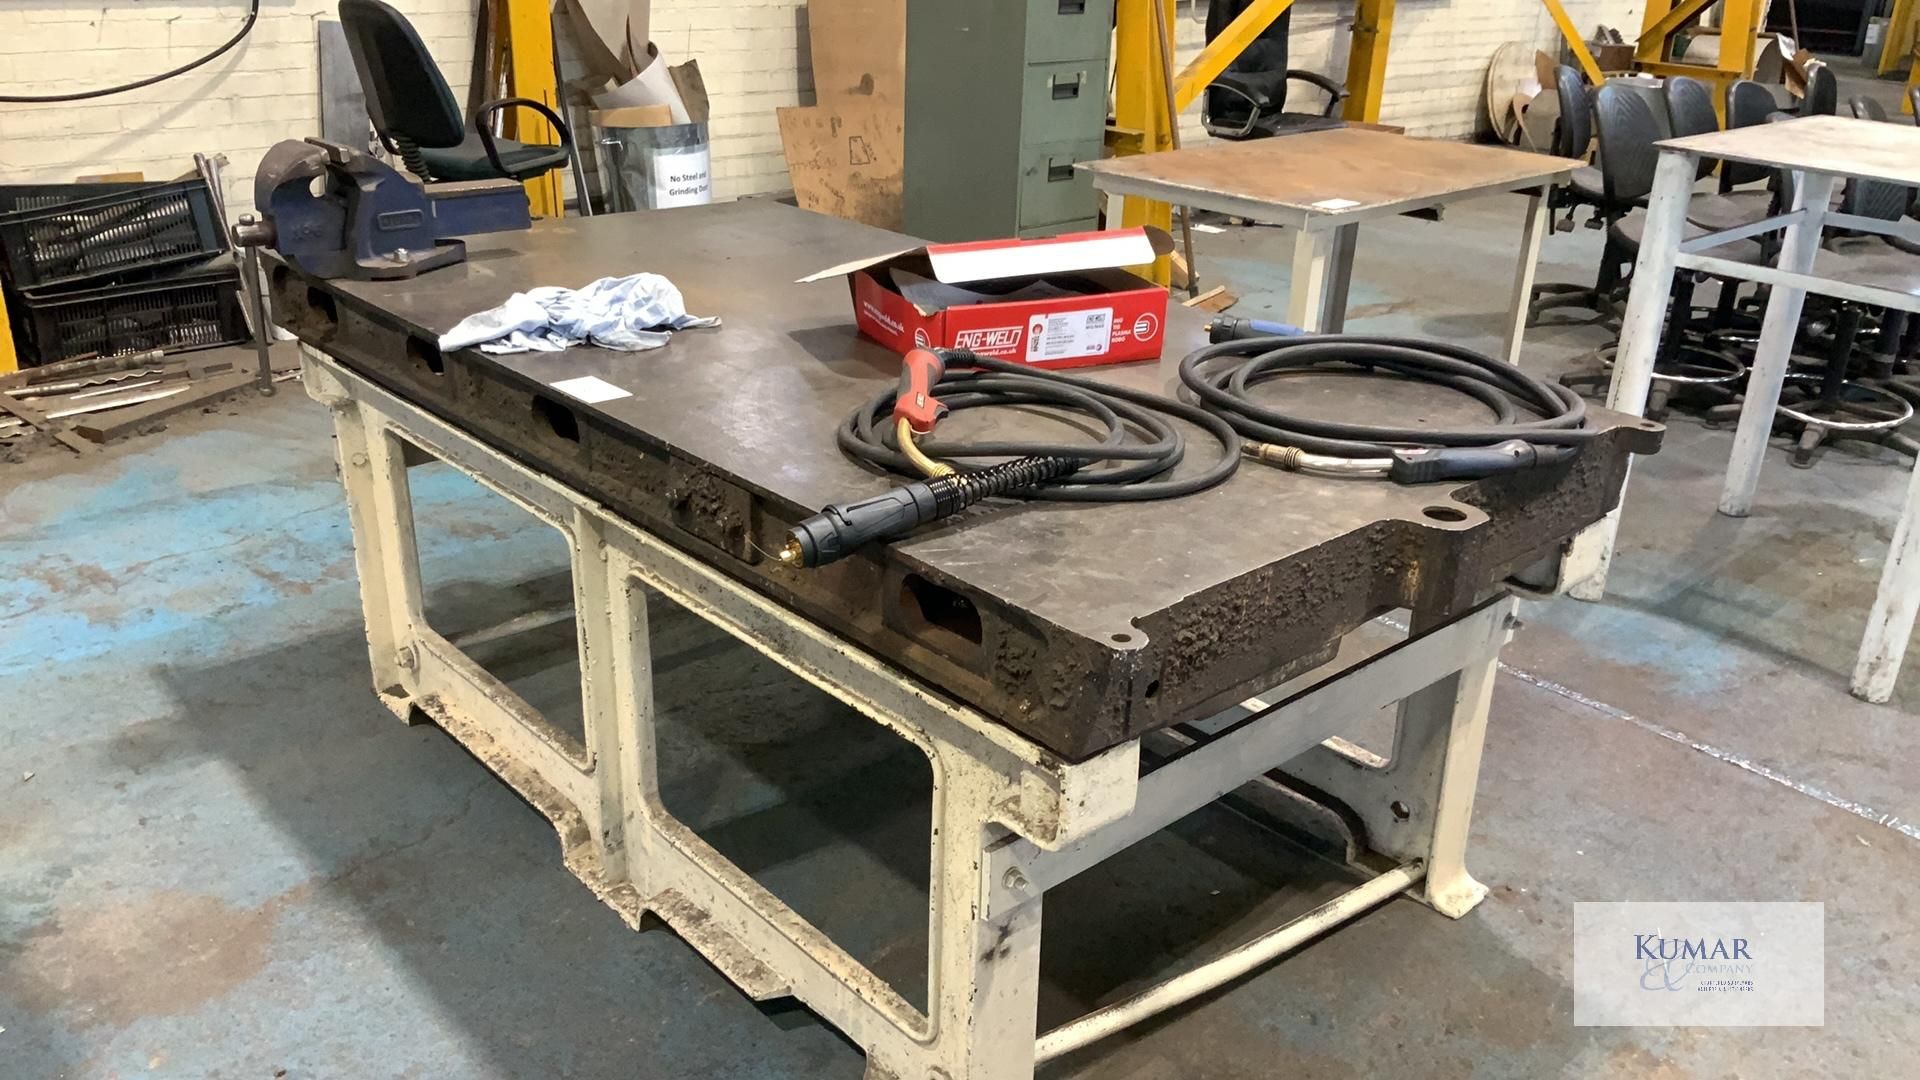 Heavy Duty Welding Bench with Vice - Dimensions 210cm x 107cm x 79cm Height - Does Not Include